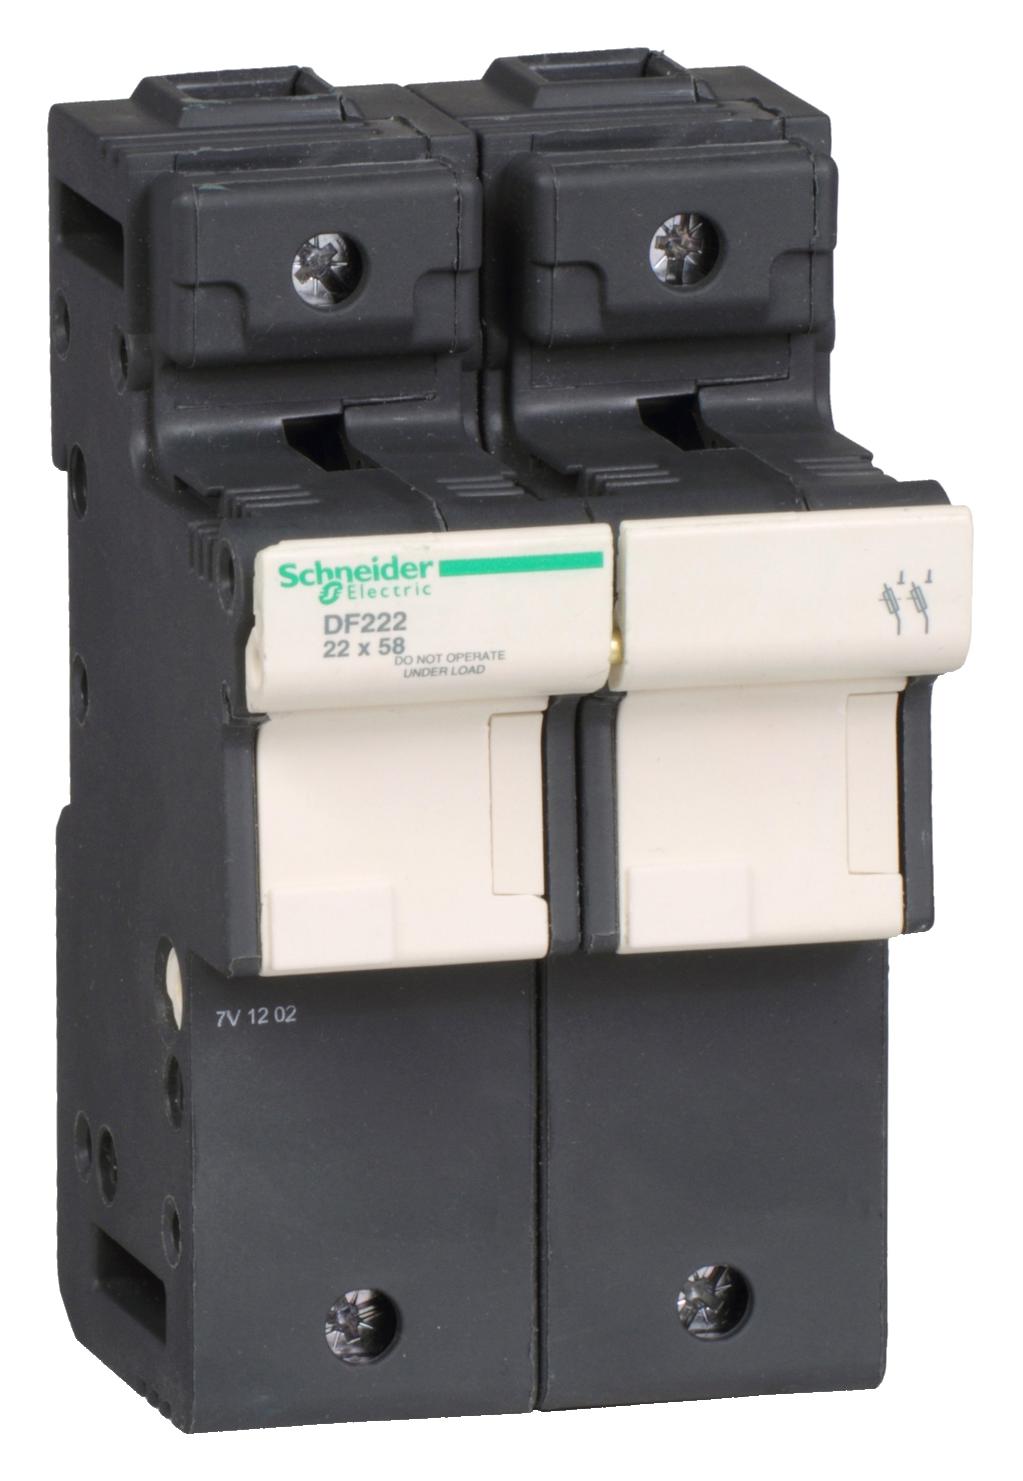 DF222 FUSE HOLDER 2P 125A FOR FUSE 22 X SCHNEIDER ELECTRIC